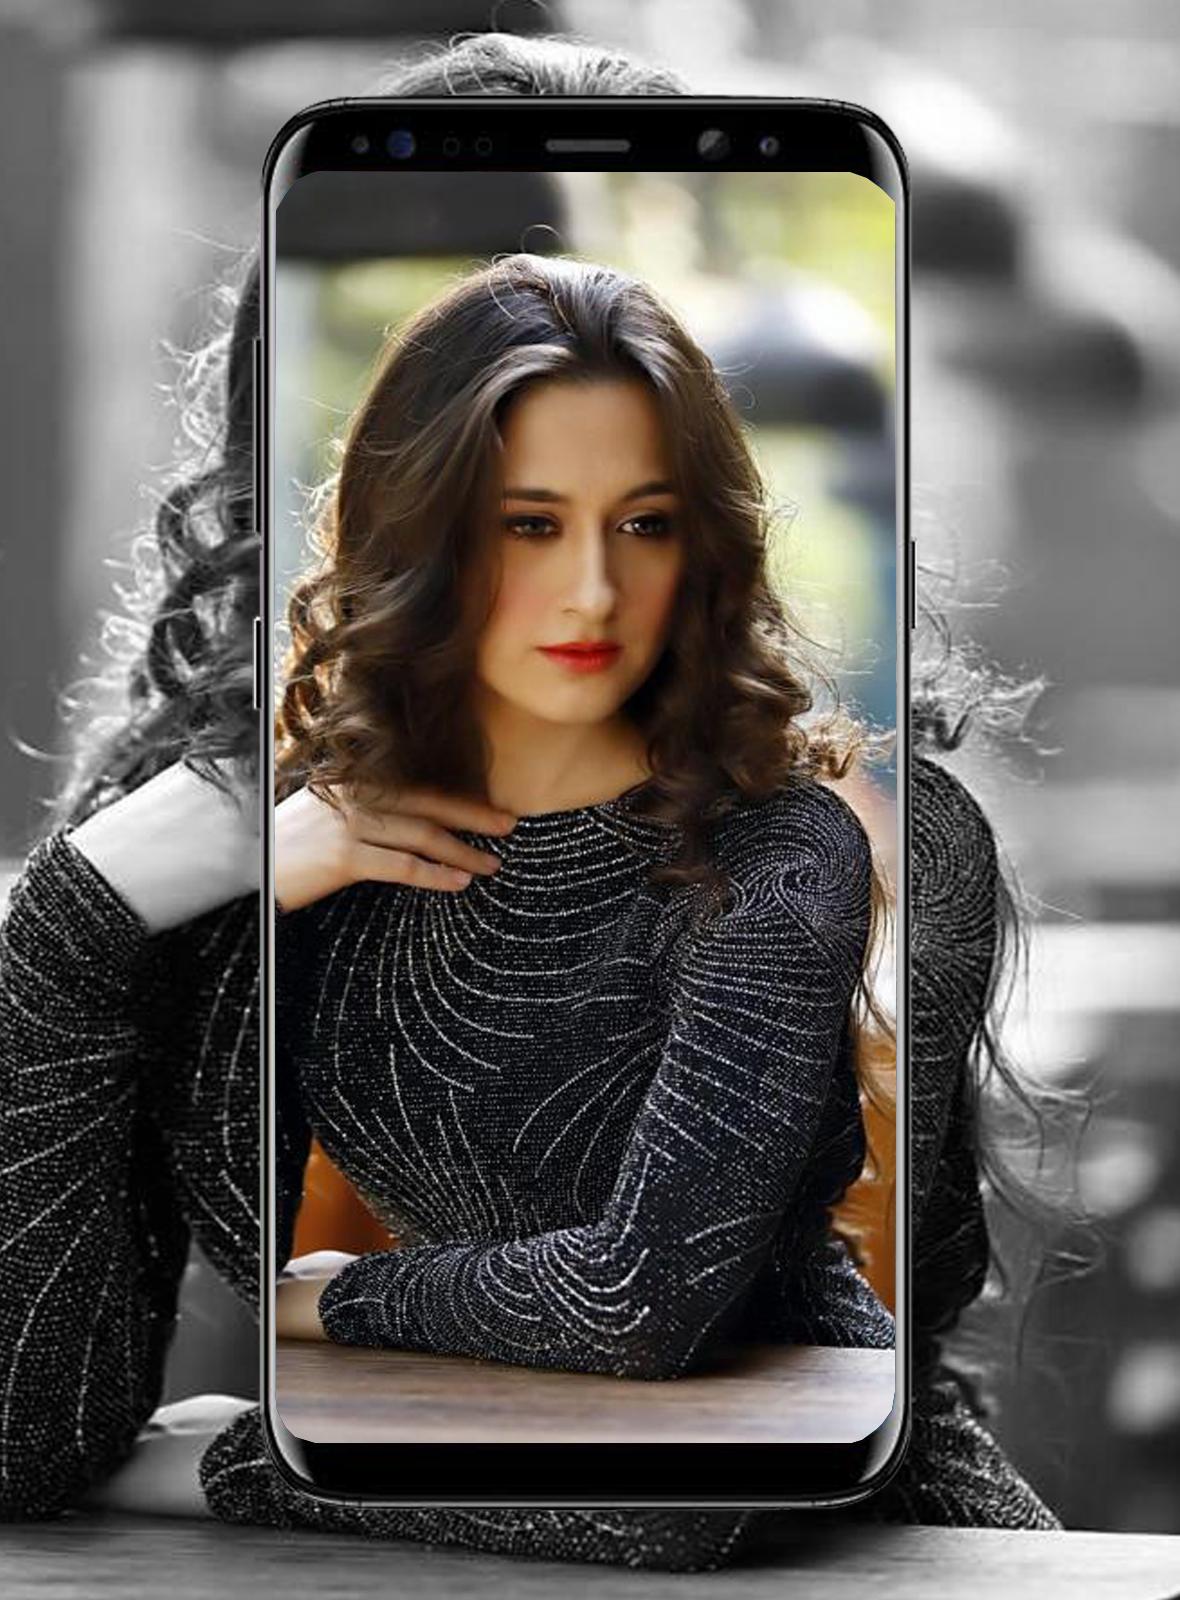 Sanjeeda Sheikh Wallpapers Bollywood for Android   APK Download 1180x1600